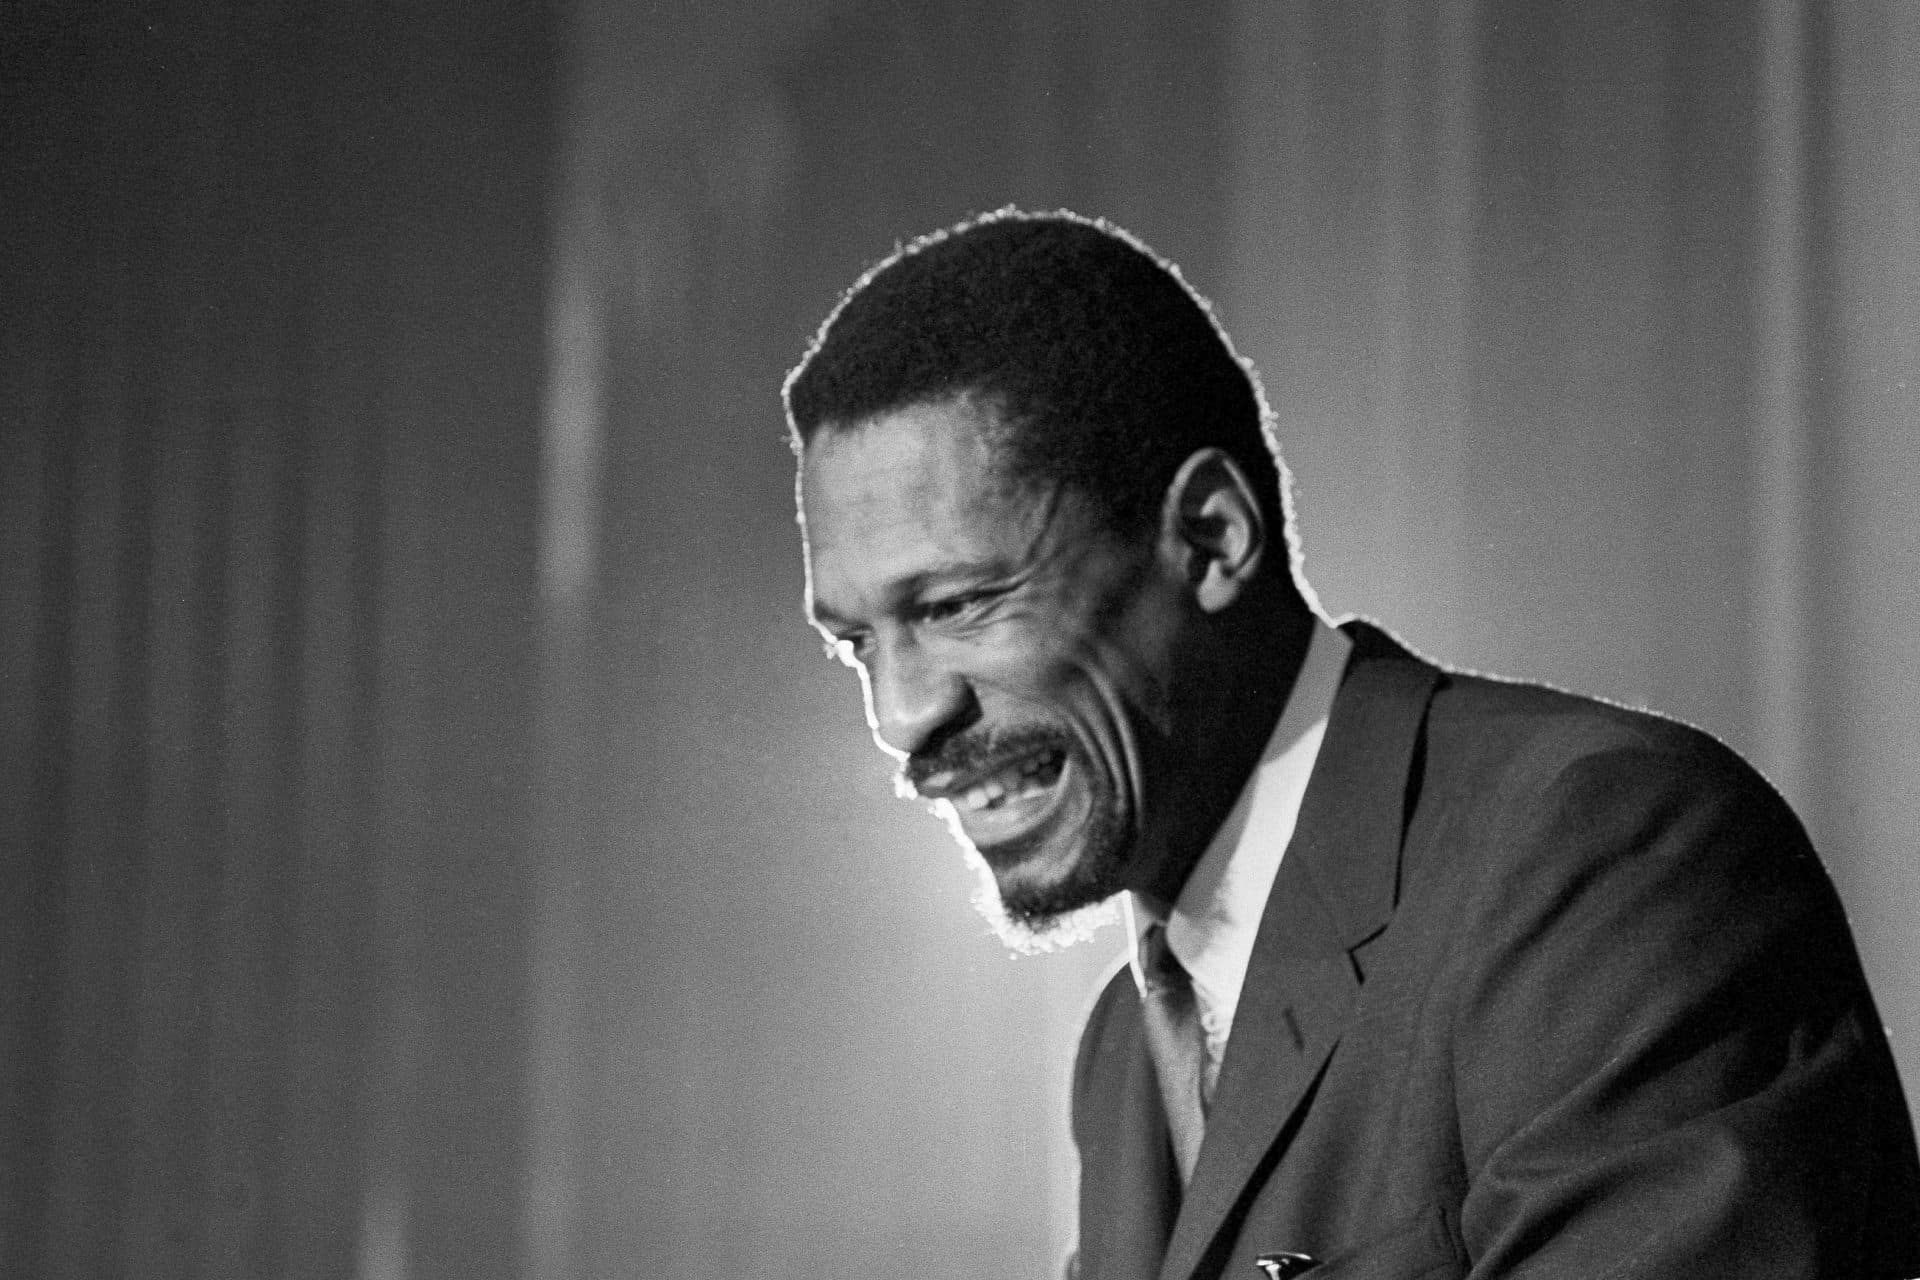 Bill Russell grins at announcement that he had been named coach of the Boston Celtics basketball team on April 18, 1966. (AP)